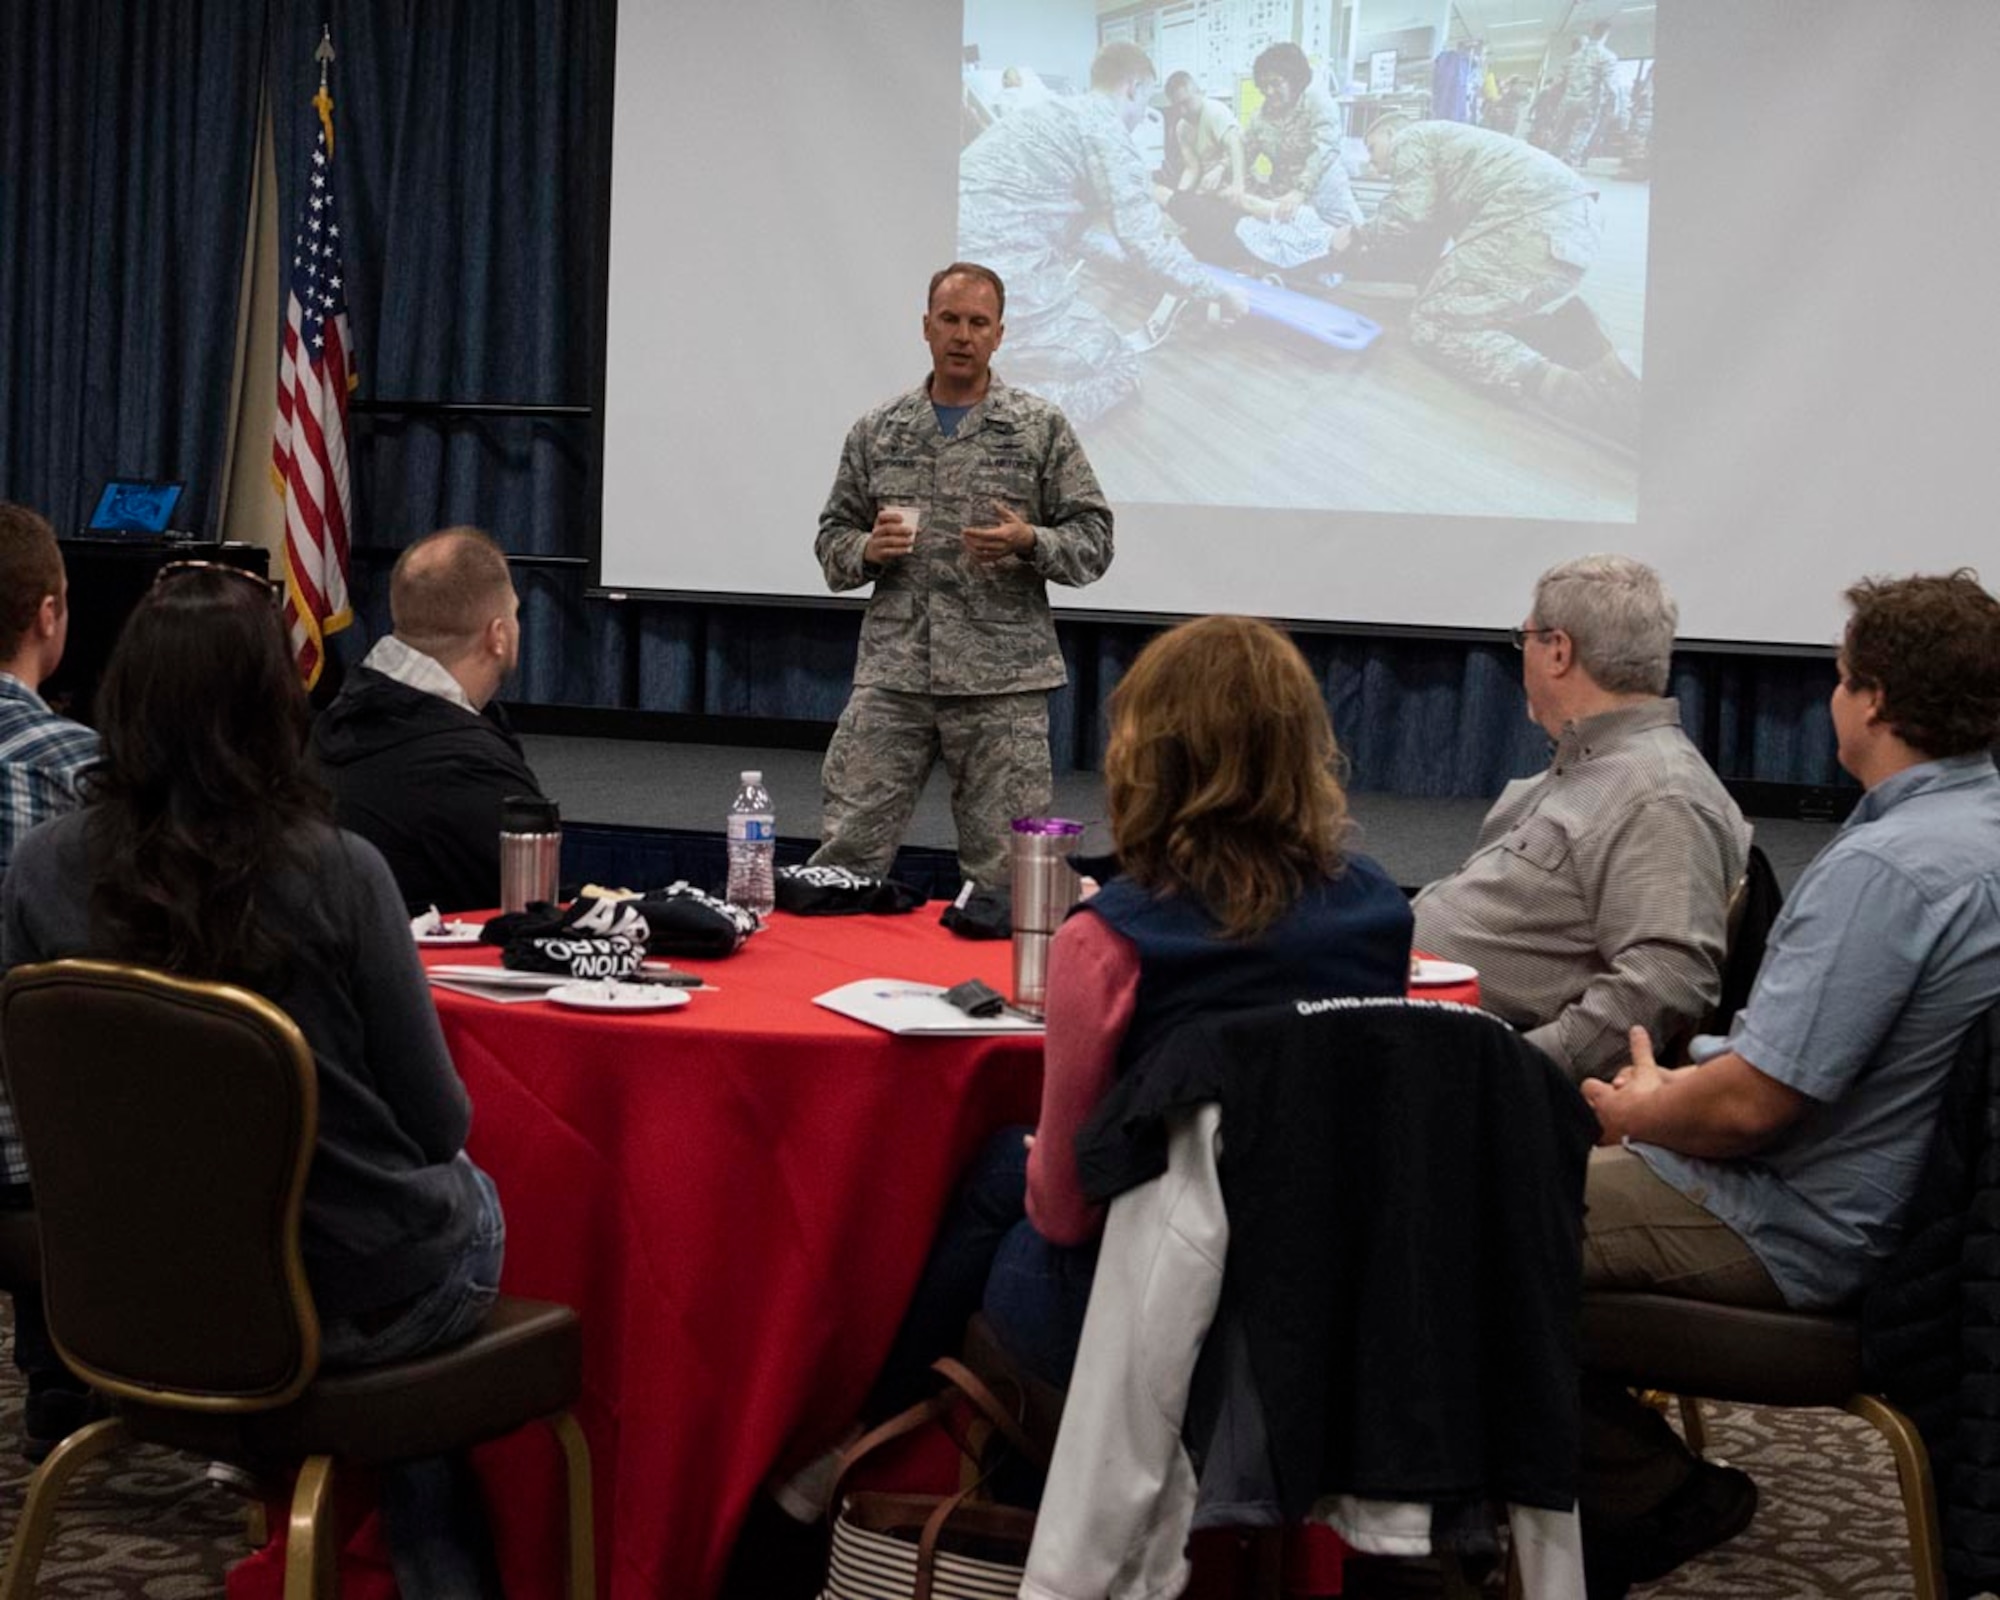 Col. Johan Deutscher, commander, 141st Air Refueling Wing, addresses a group of civilian employers attending an Employer Support of the Guard and Reserve “Boss Lift” event May 5, 2018 at Fairchild Air Force Base, Wash. Airmen from the 141st ARW have the opportunity to nominate their civilian employers to participate in various ESGR events throughout the year. ESGR aims to encourage cooperation between service members and their civilian employers and to educate them on the mission of the 141st ARW. (U.S. Air National Guard photo by Staff Sgt. Rose M. Lust)